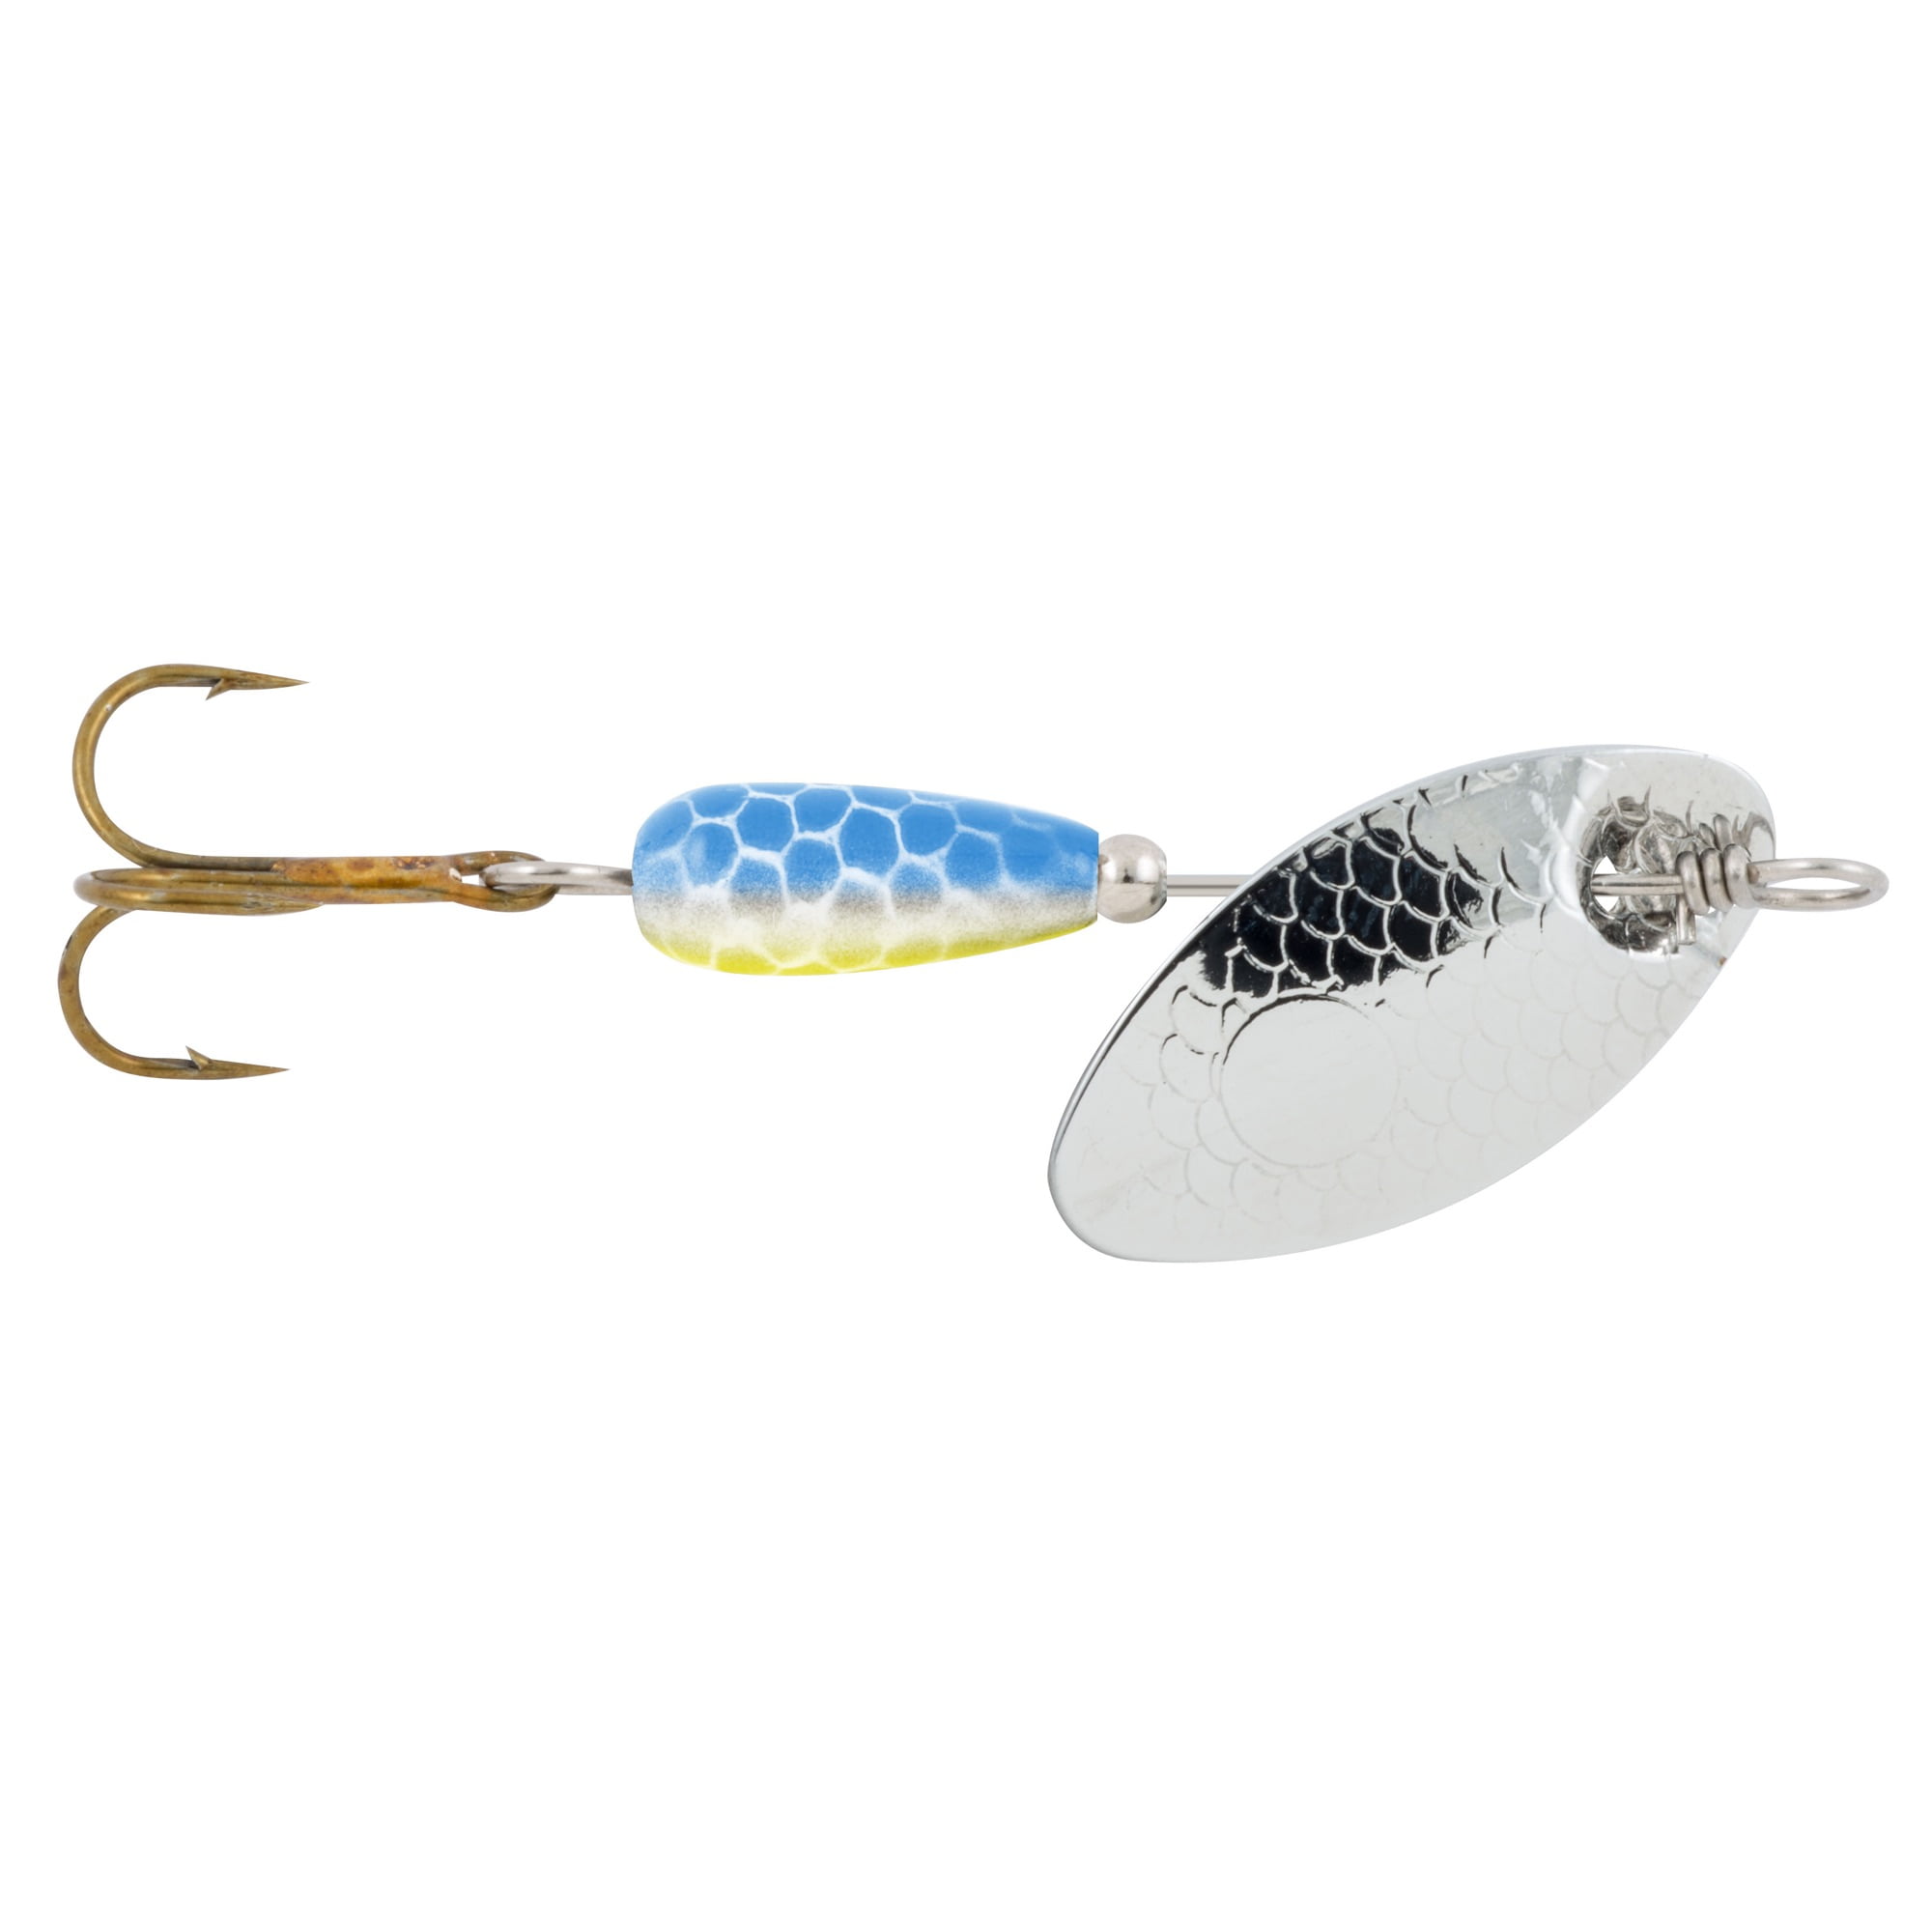 South Bend Techny Spinnerbaits Freshwater Trout Fishing Lures